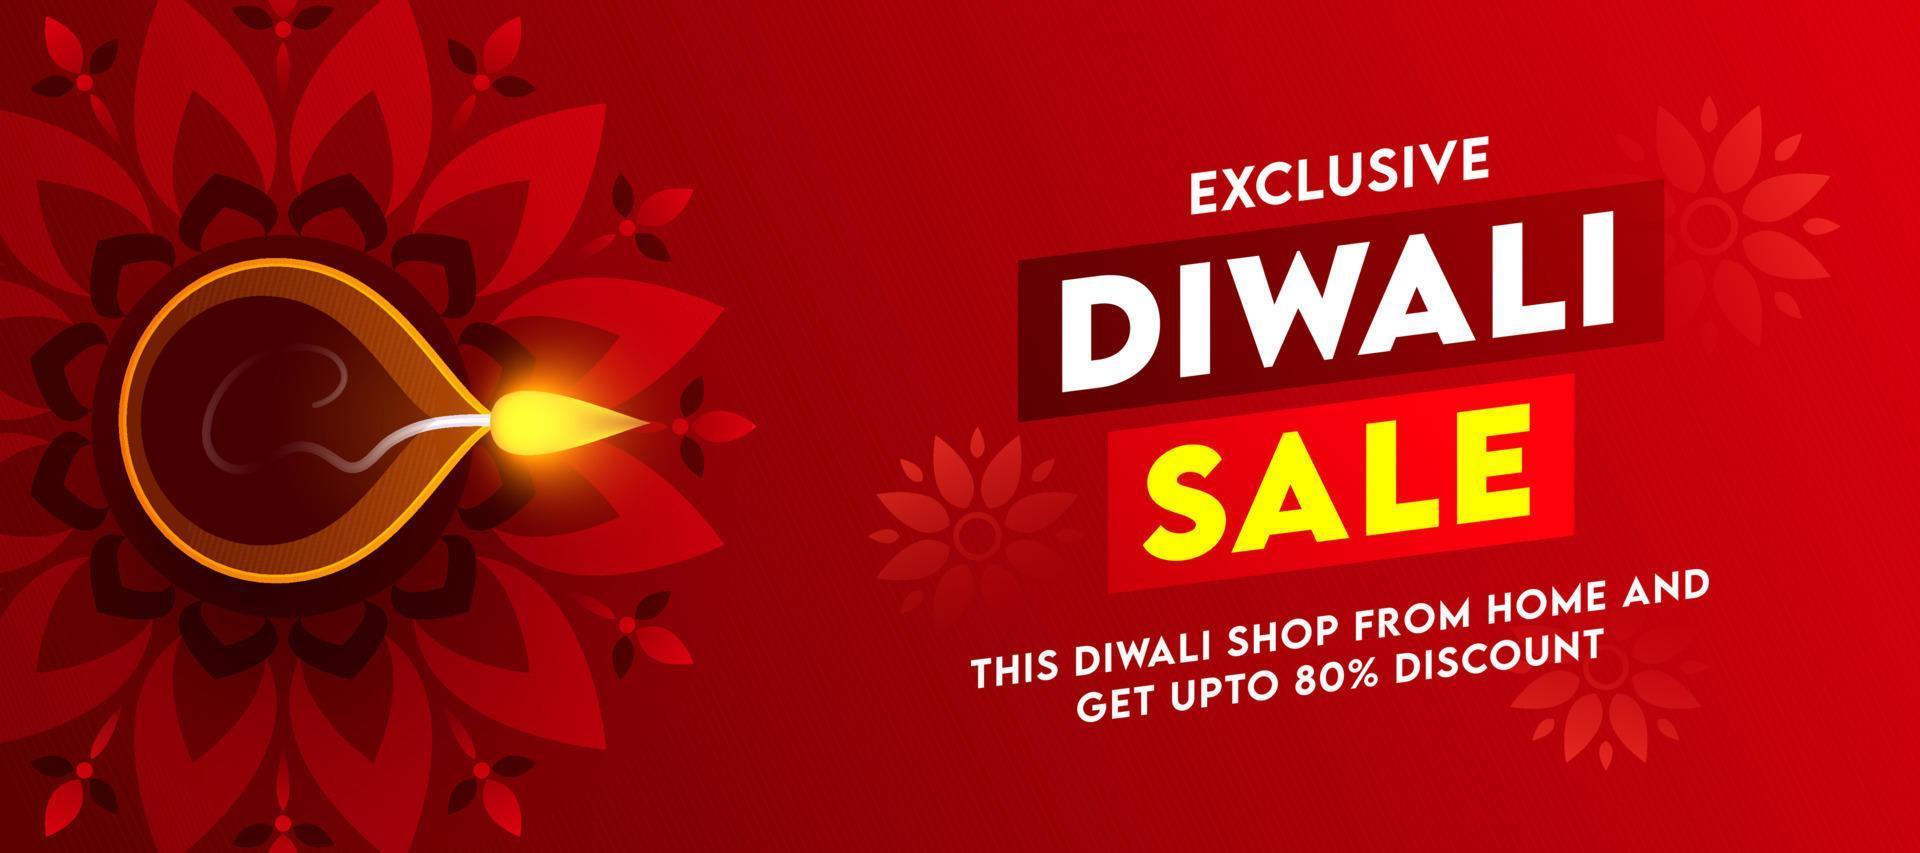 Exclusive Diwali Sale Header Or Banner Design With Discount Offer And Top View Lit Oil Lamp On Red Background. vector